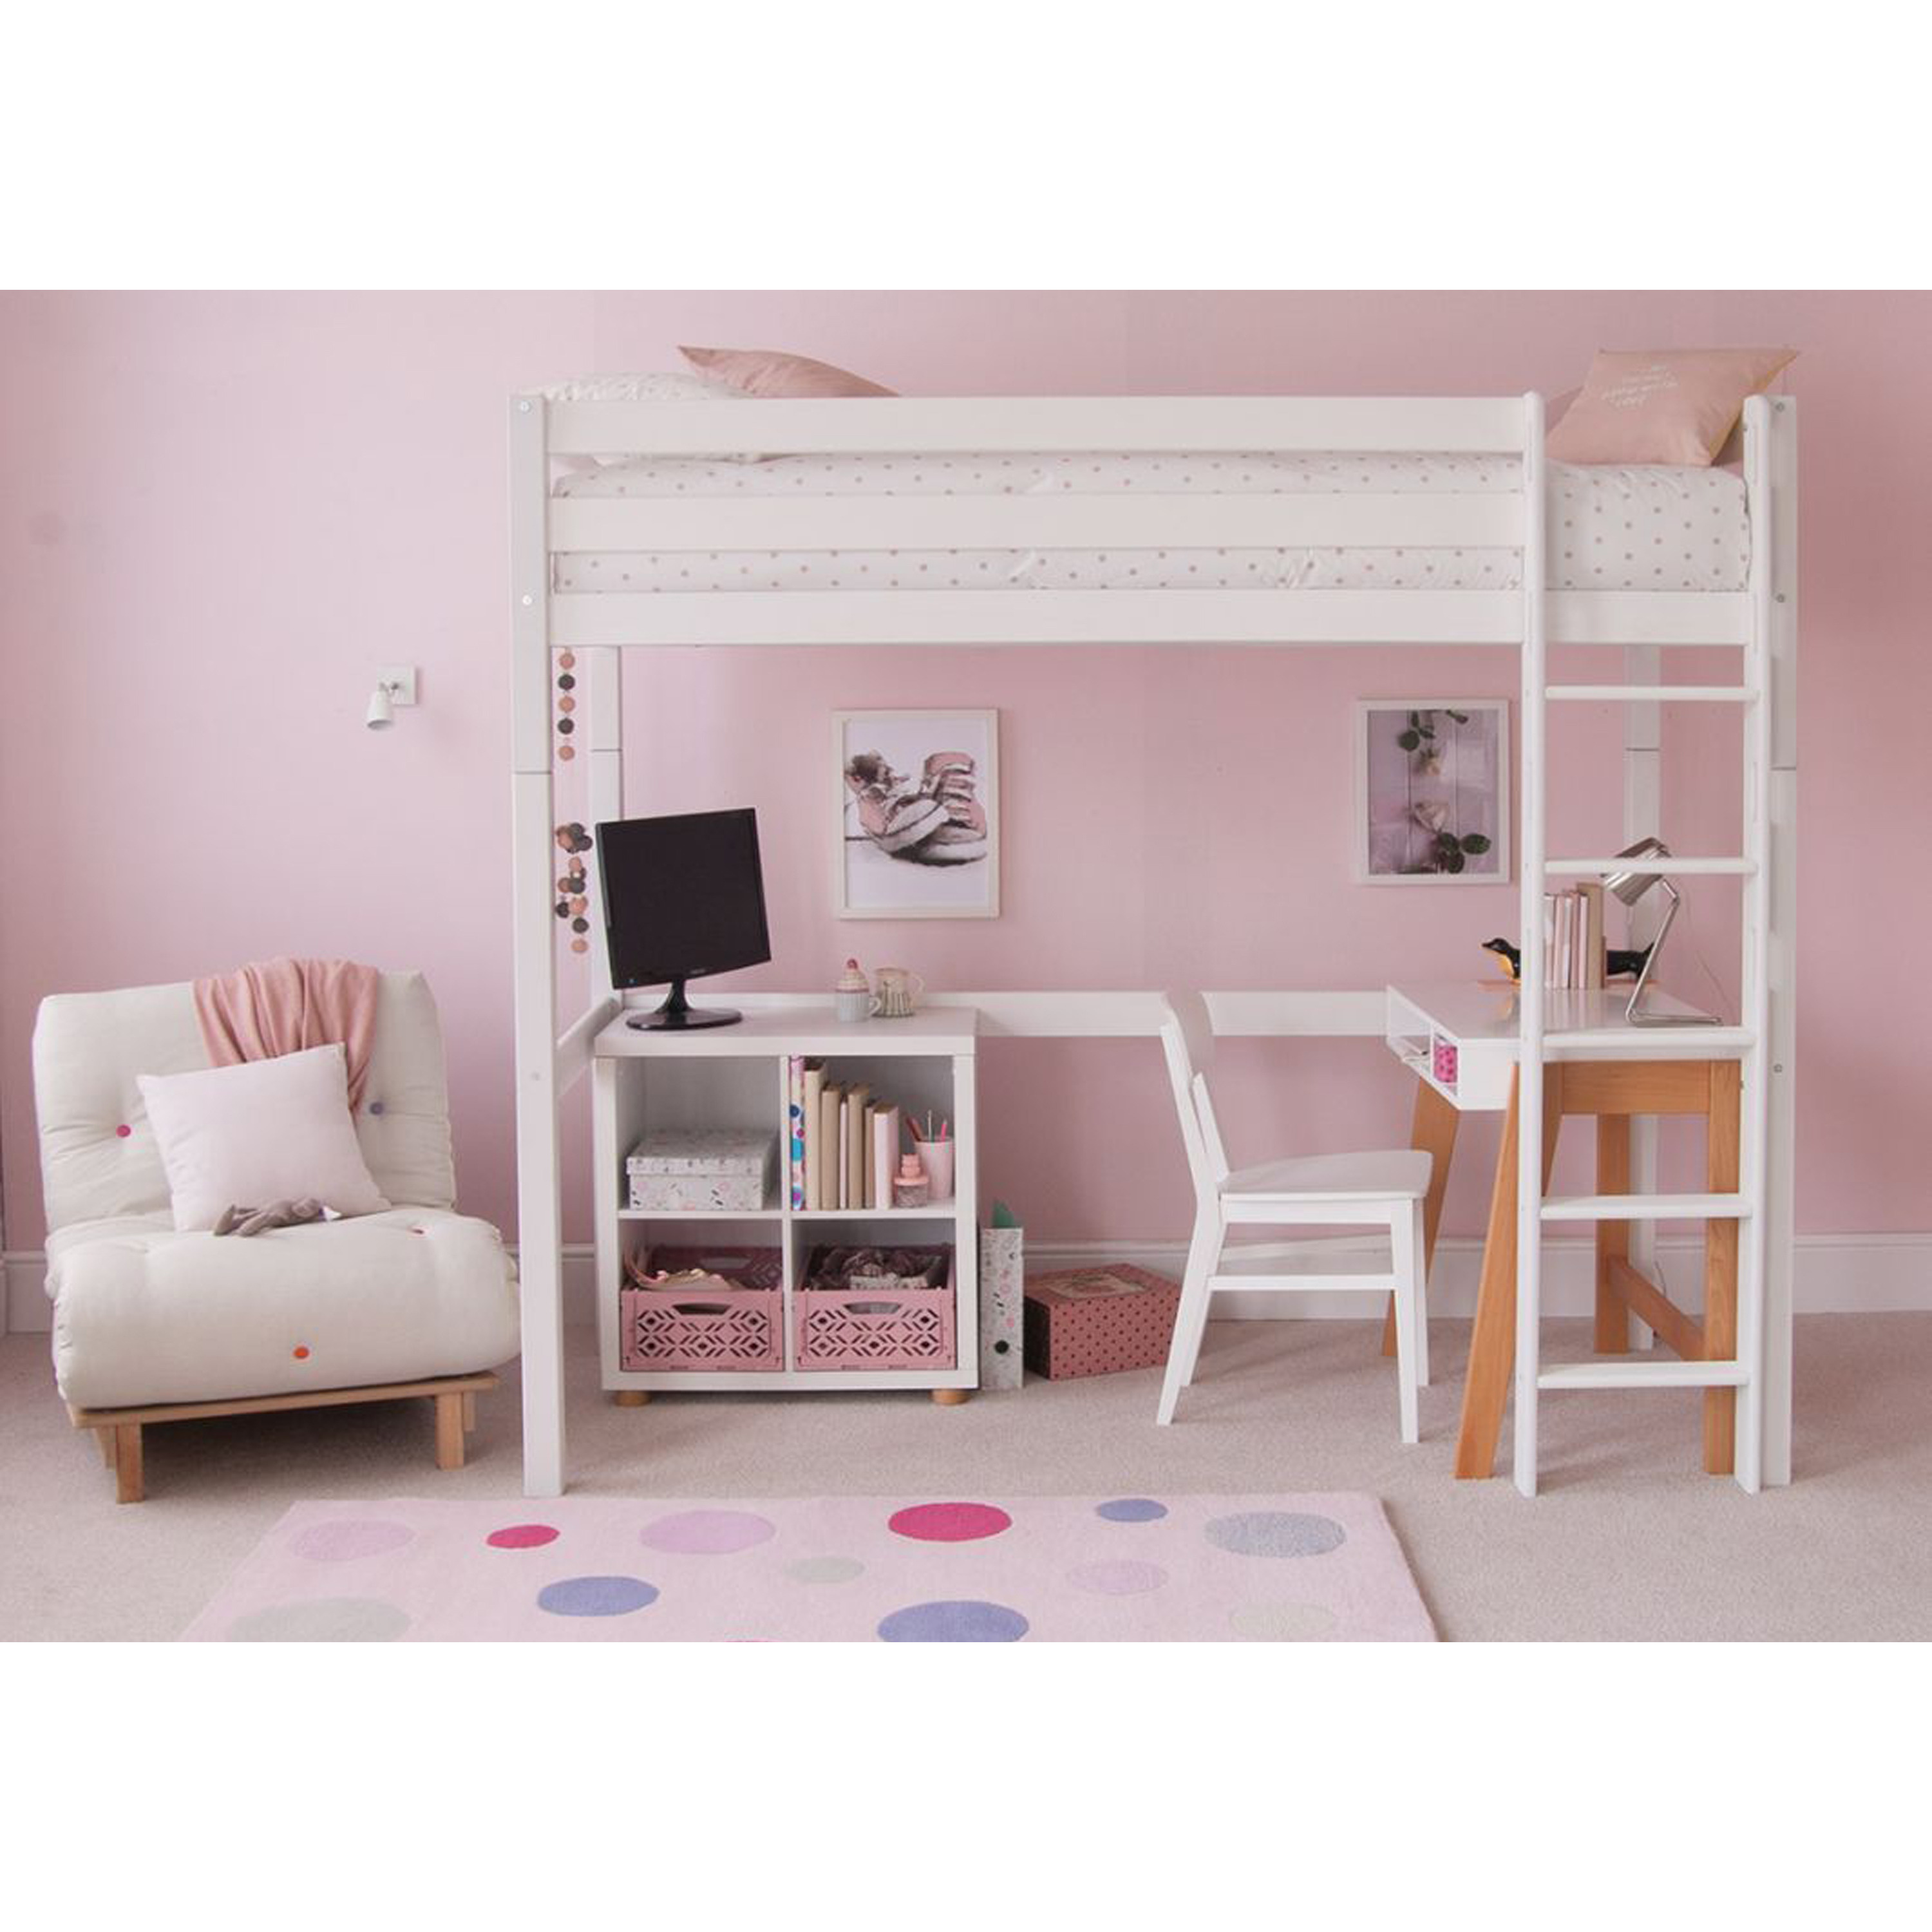 Little Folks Furniture Classic Beech High Sleeper Bed with Desk, Storage and Futon Chair Bed Lollipop